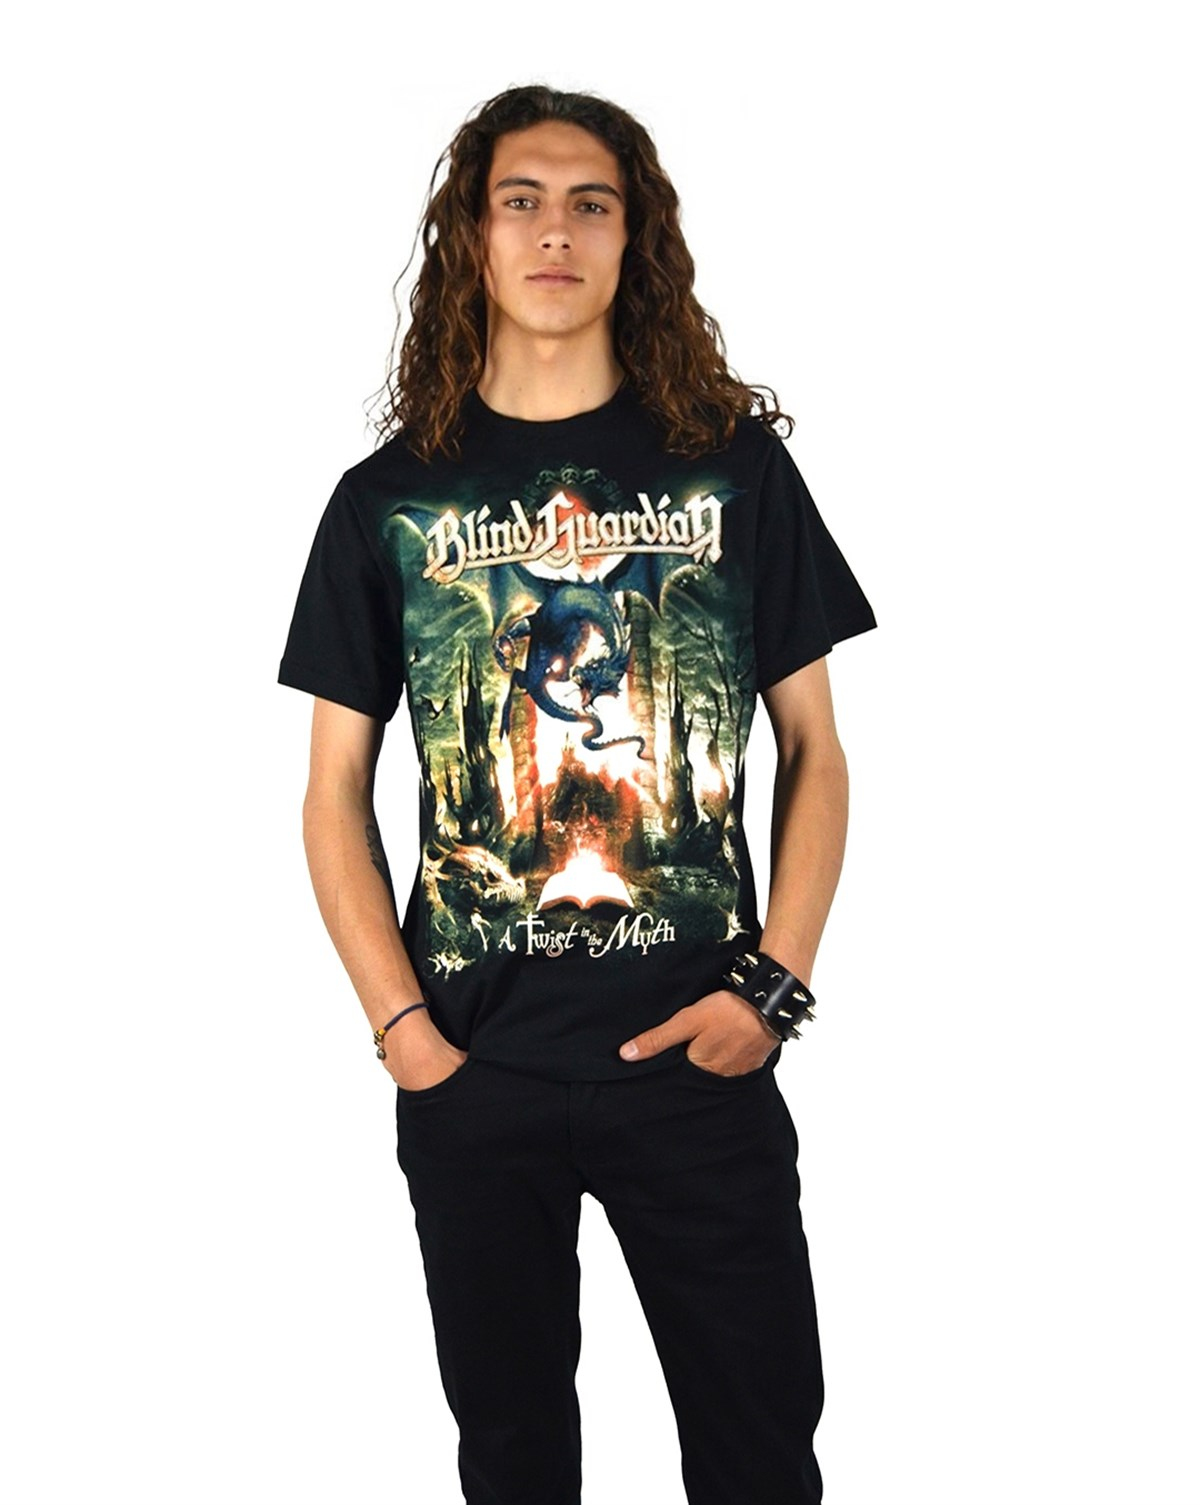 BLIND GUARDIAN A Twist in The Myth T-shirt